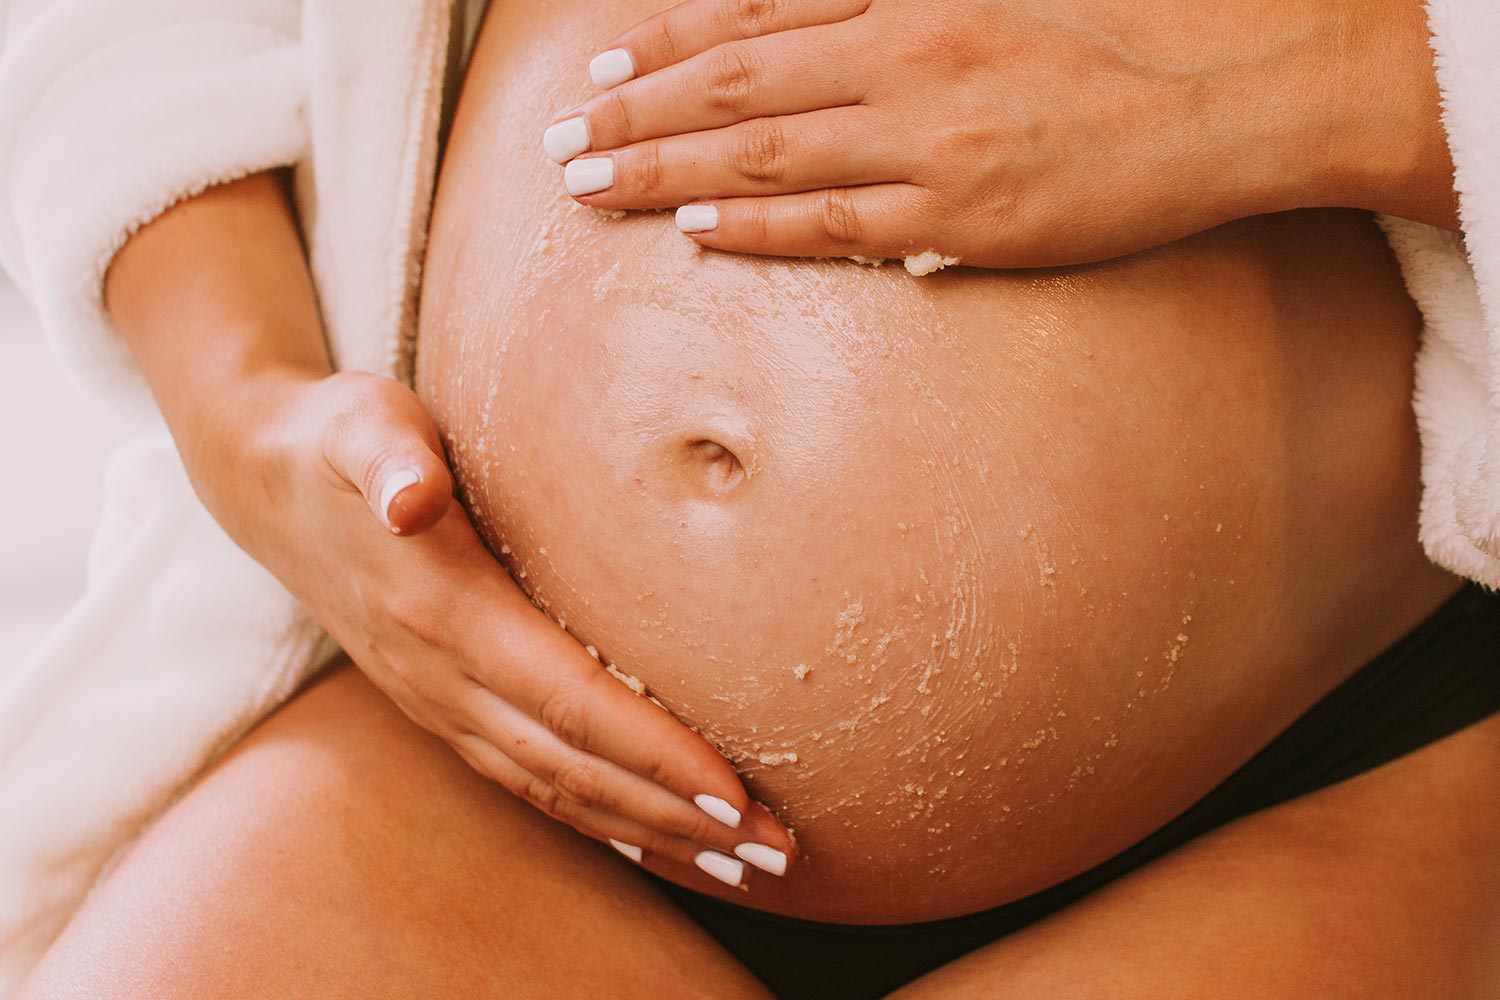 Finding the Best Stretch Mark Cream During Pregnancy